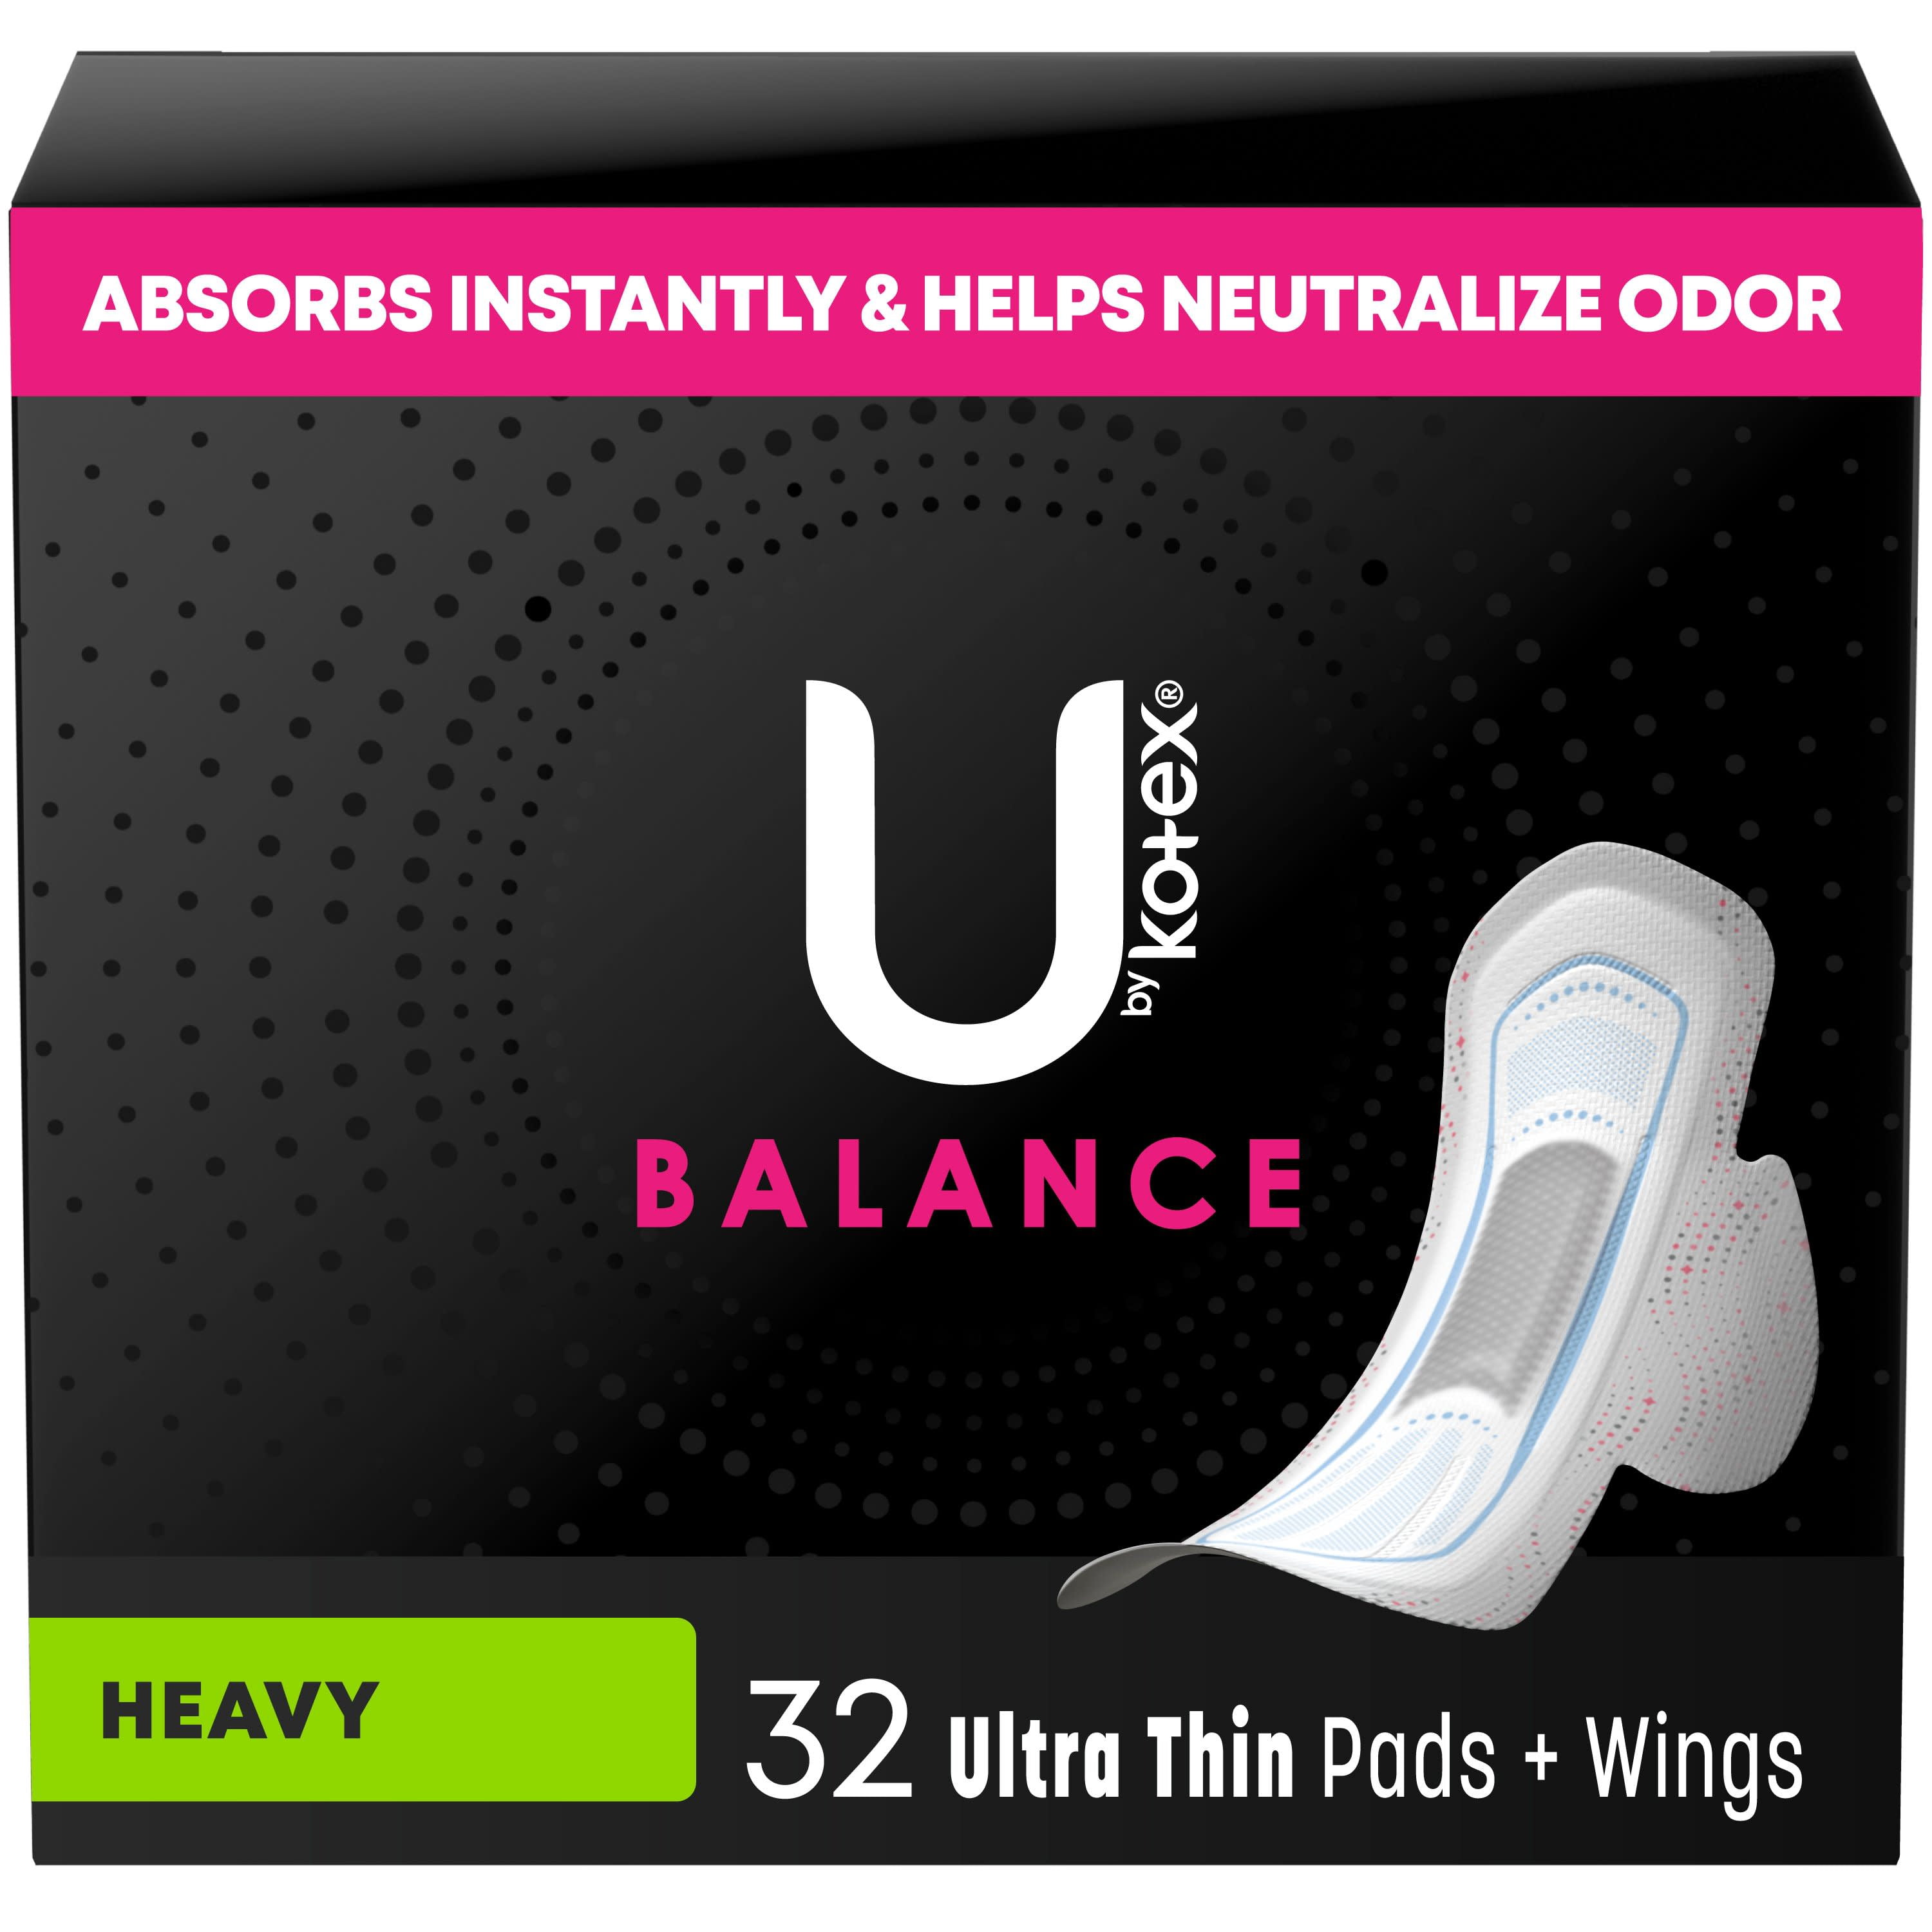 U by Kotex Balance Ultra Thin Pads with Wings, Heavy Absorbency, 32 Count 